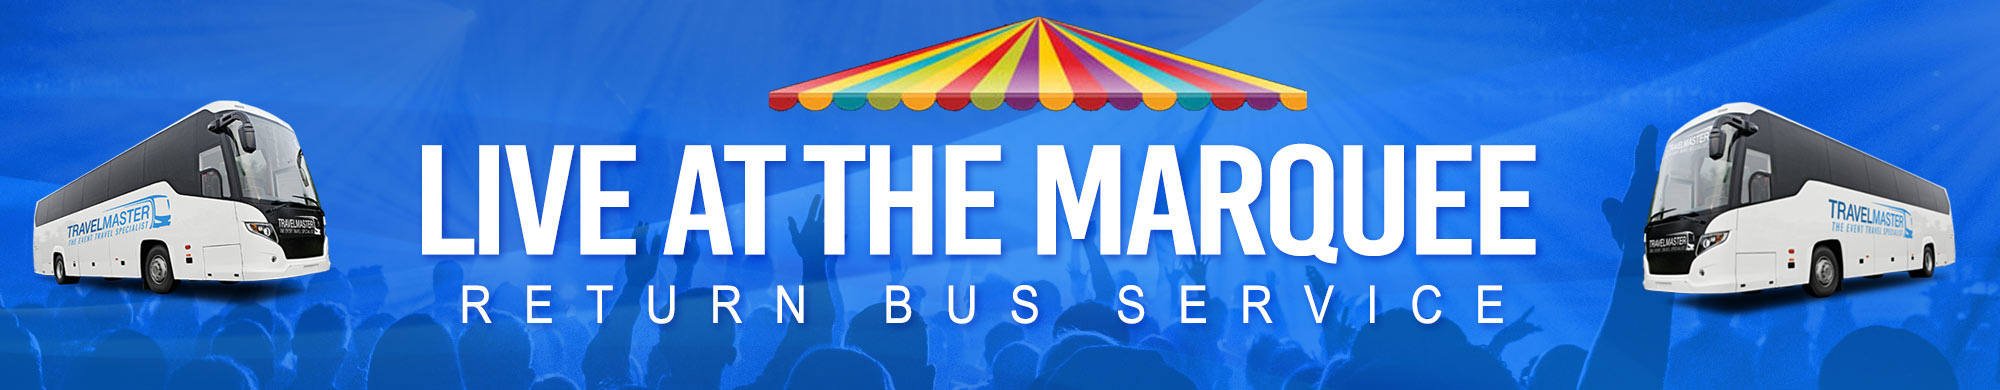 Bus to Live At The Marquee